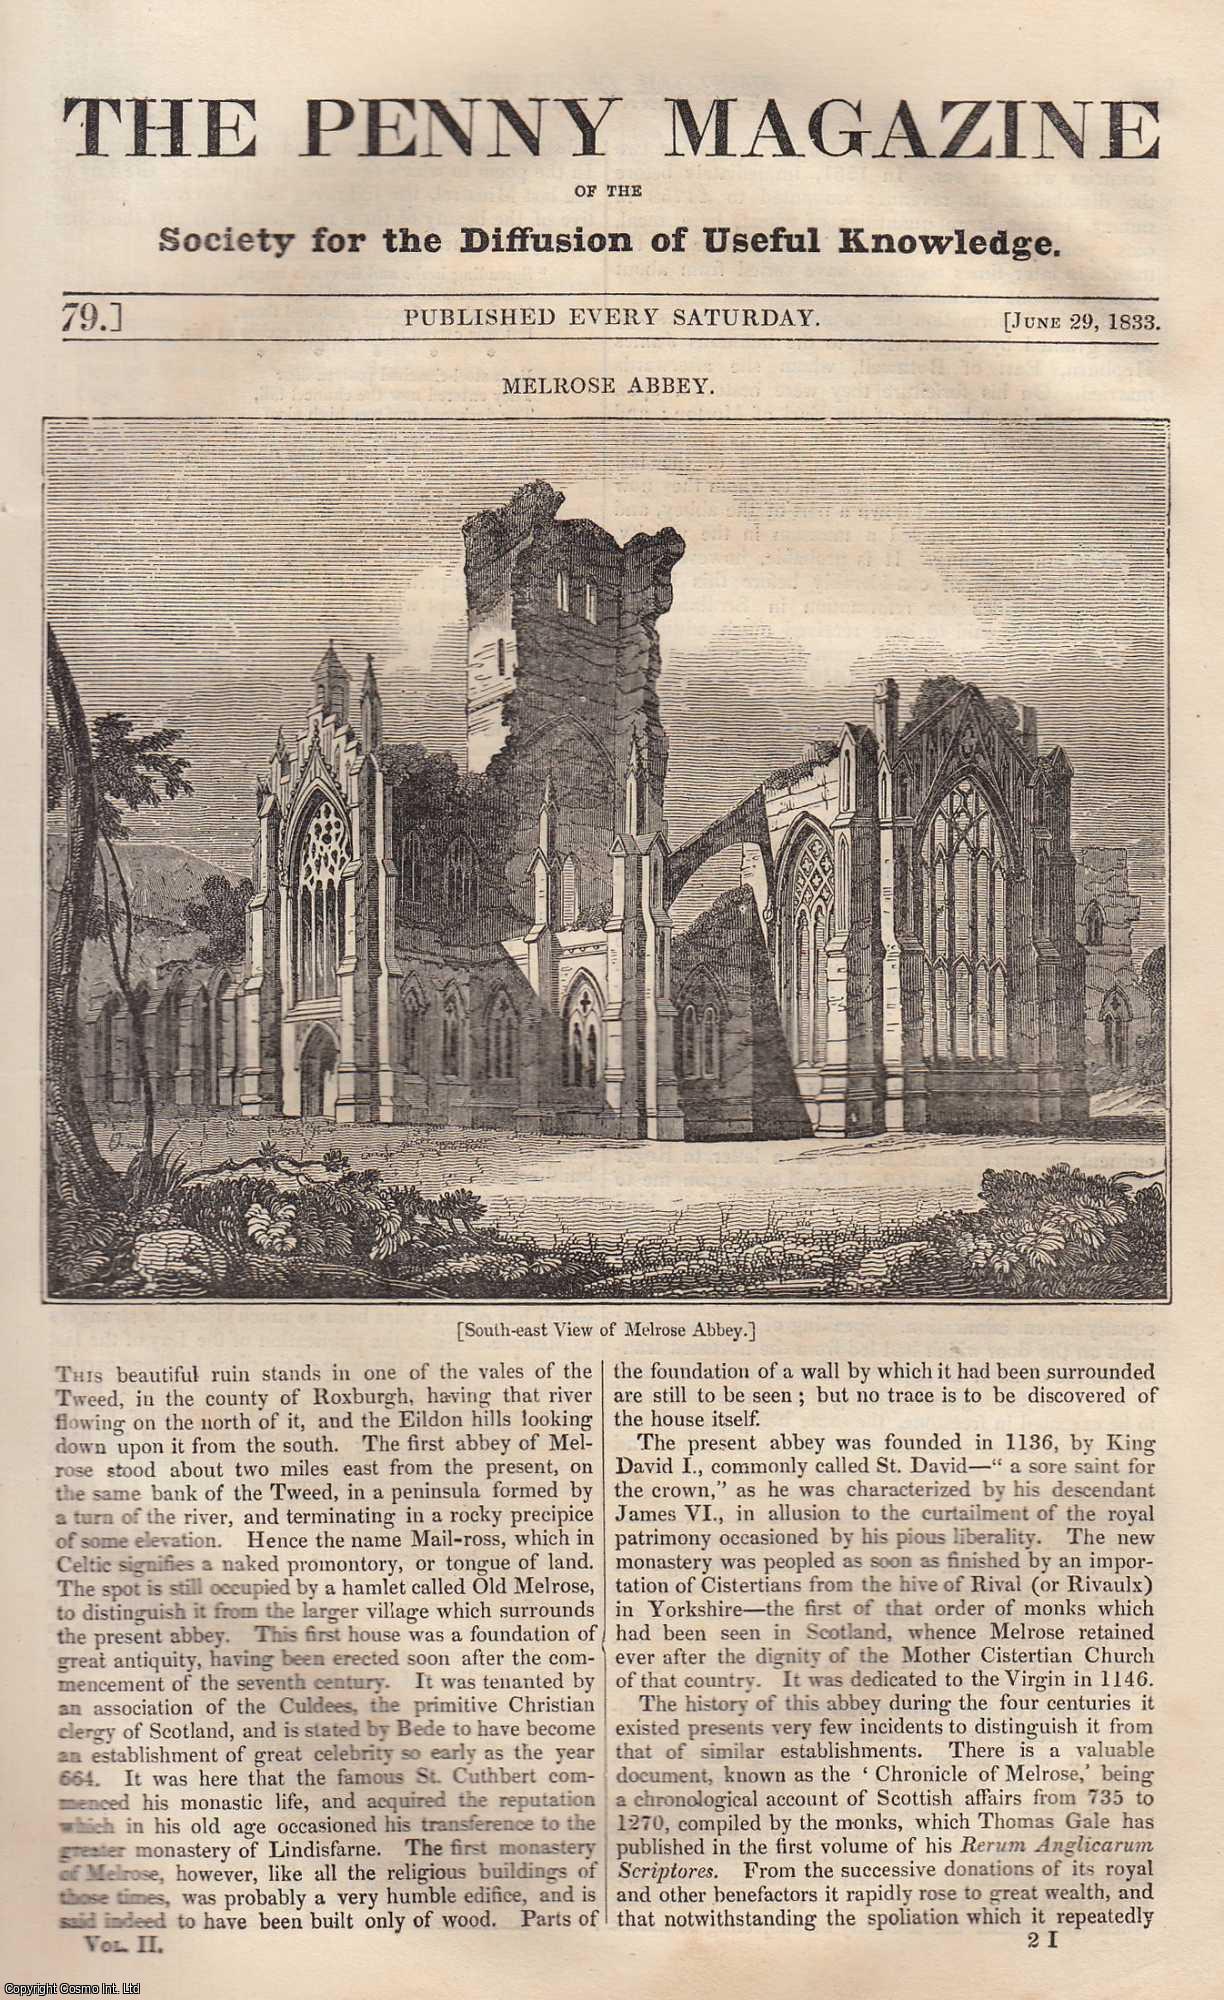 Penny Magazine - Melrose Abbey, Roxburgh; Conflagrations of Forests in Sweden; The Anglo-Chinese Kalendar for The Year of The Christian Era, 1833; Emigration to Greece, etc. Issue No. 79, June 29th, 1833. A complete original weekly issue of the Penny Magazine, 1833.